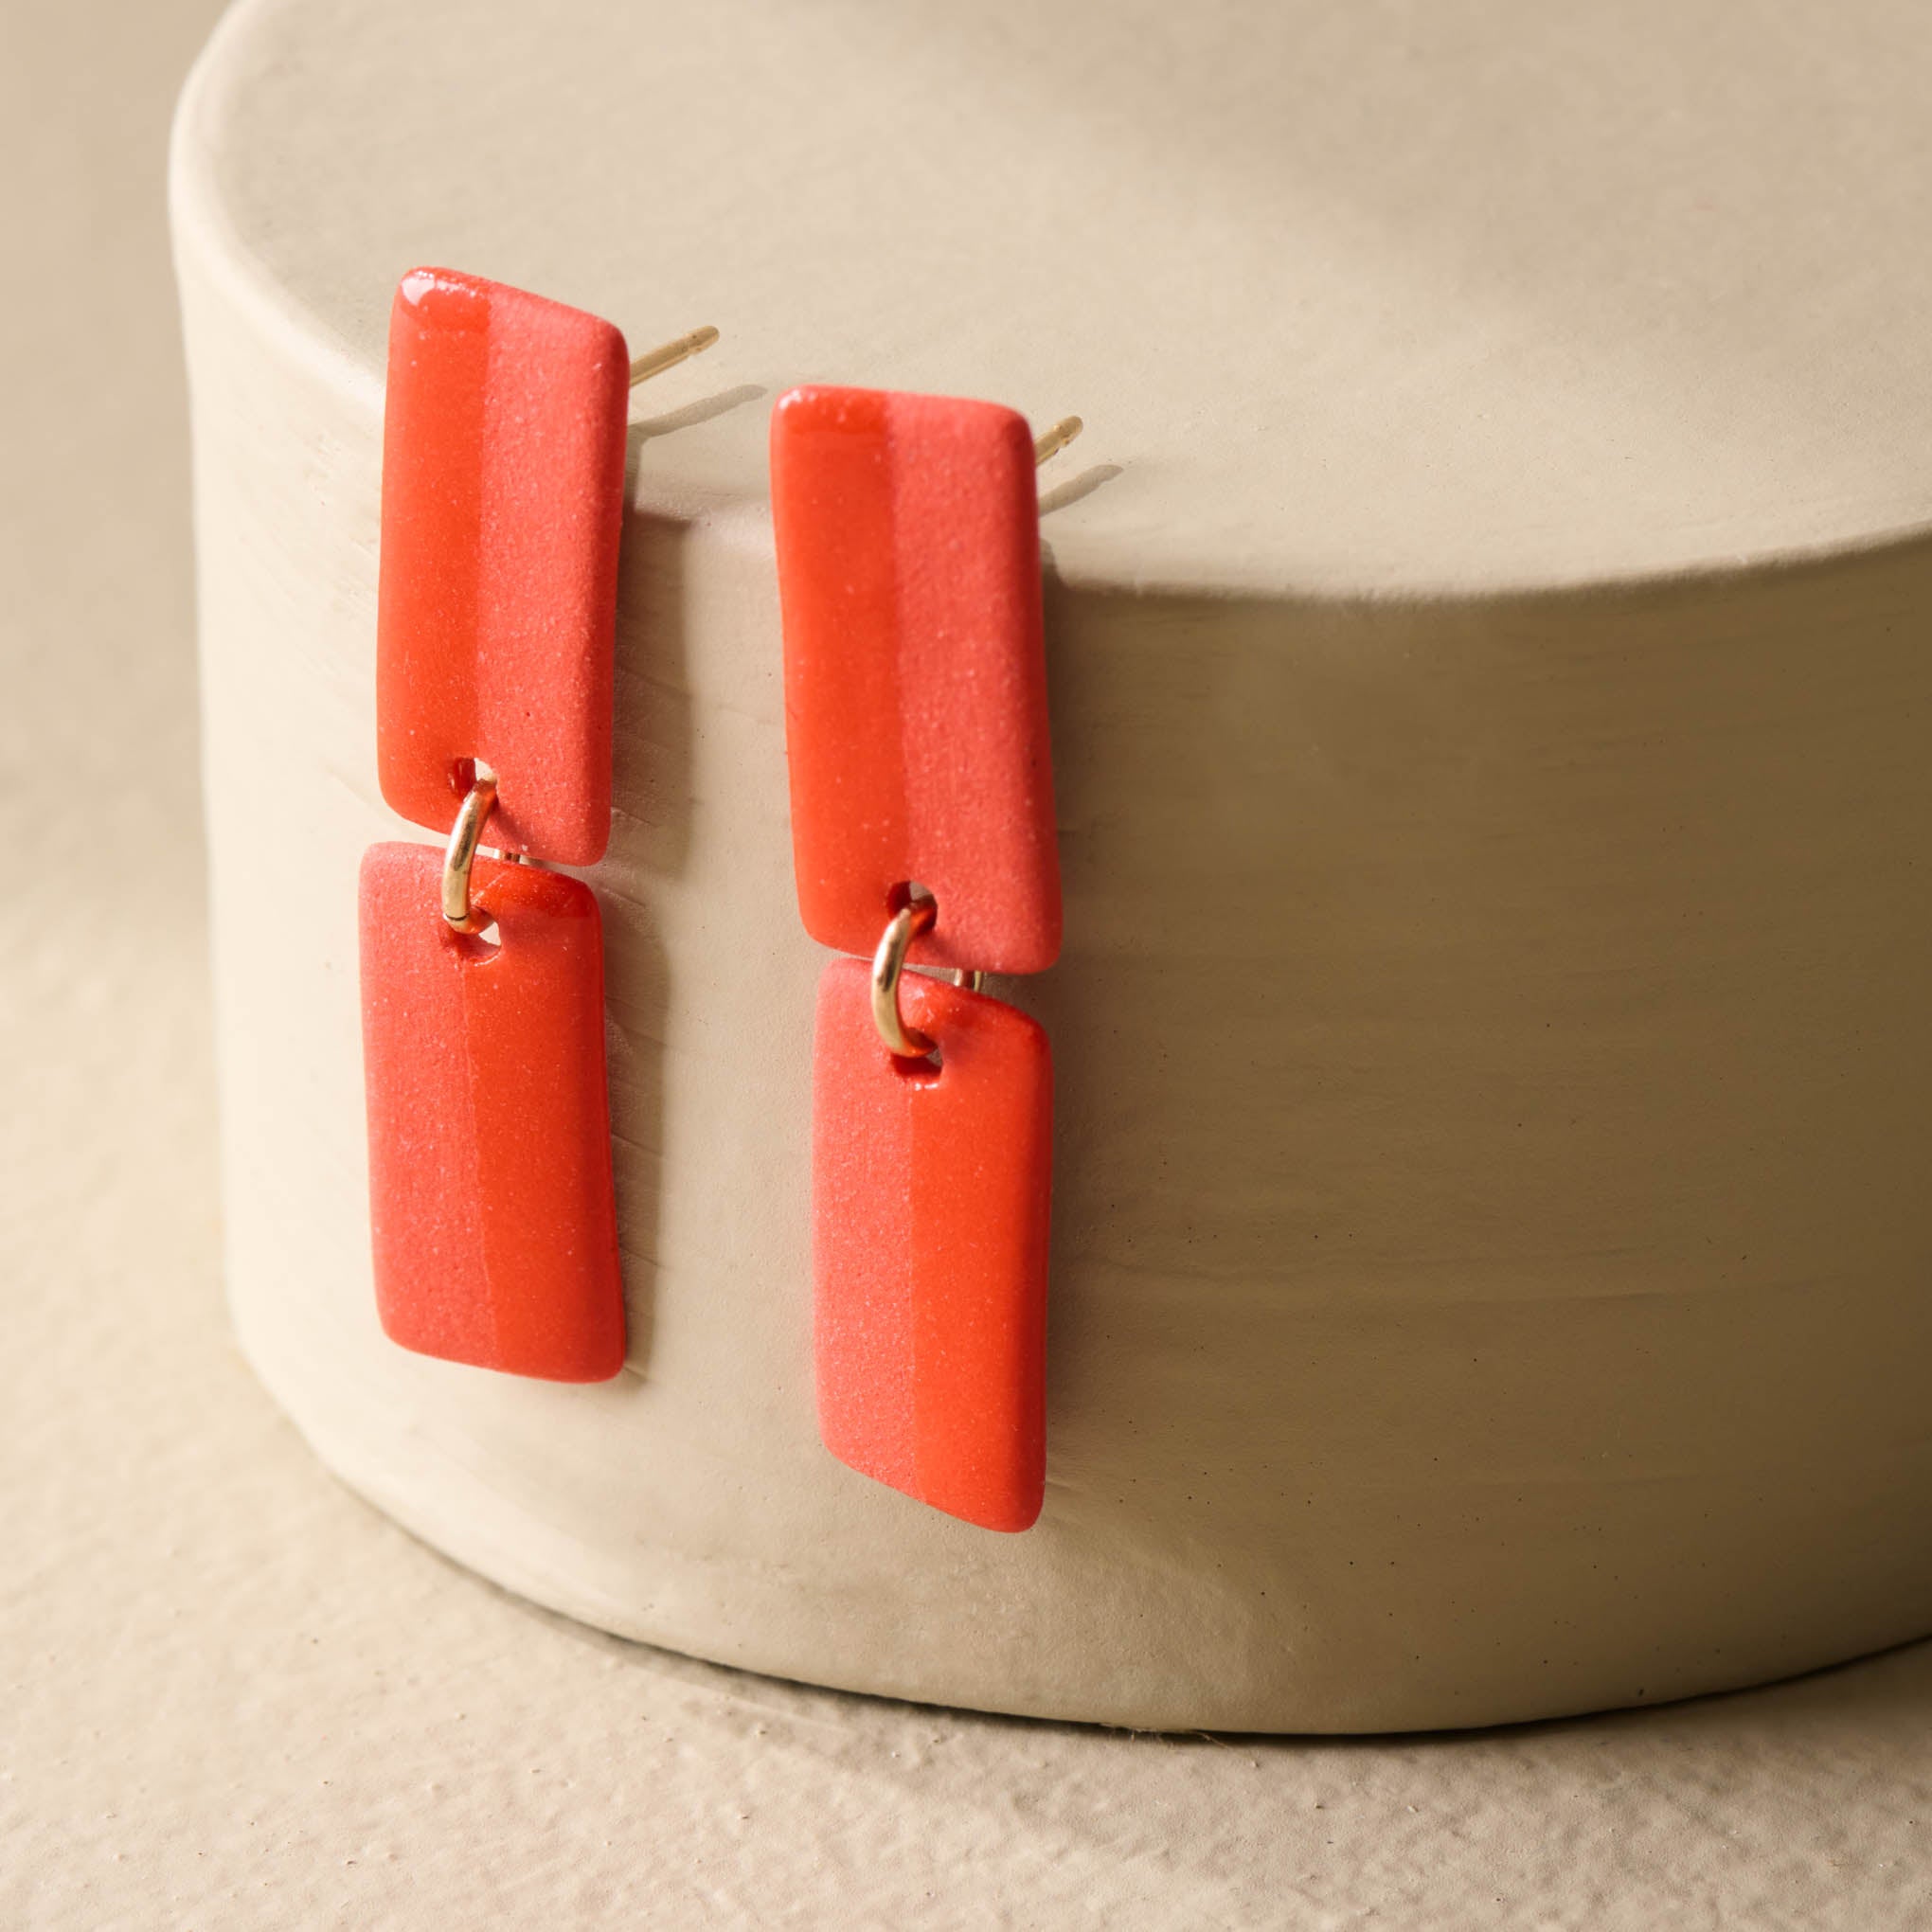 Poppy Mini Brick Earrings On sale for $52.00, discounted from $65.00